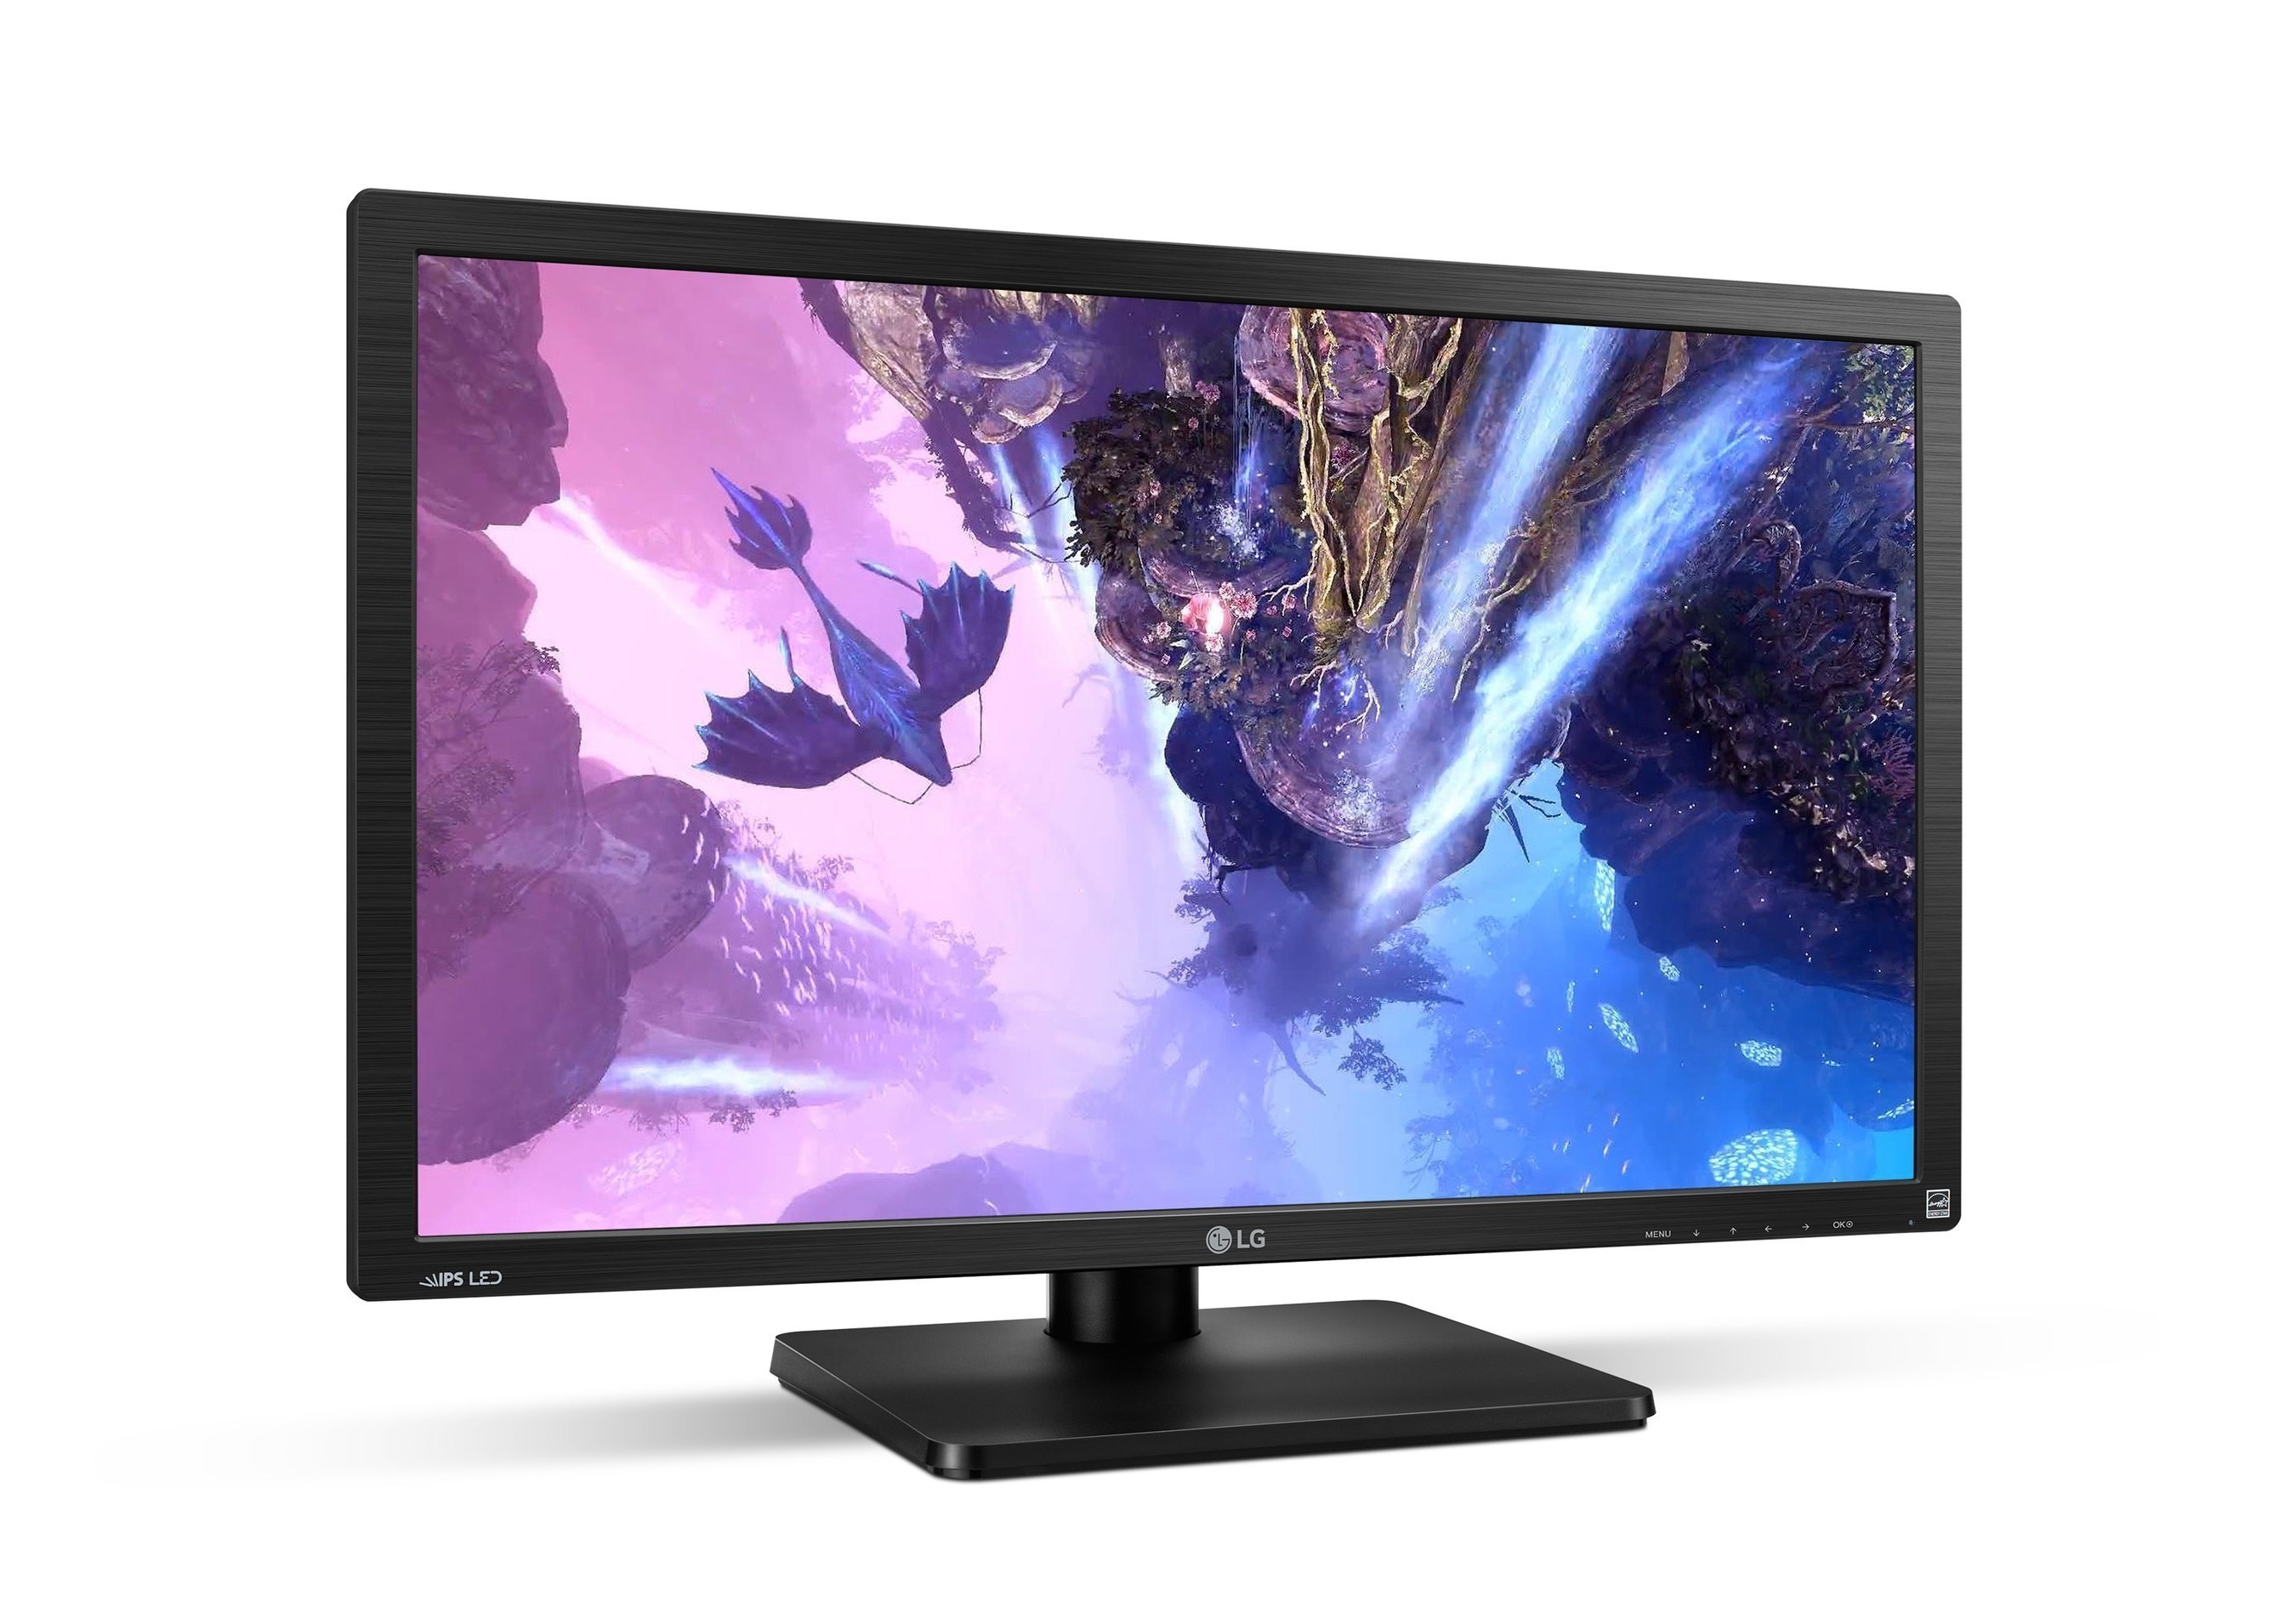 LG Electronics is helping gamers take their experience to a new level with the new LG 4K ULTRA HD monitor (model 27MU67), which will be available for the first time in the United States later this month.